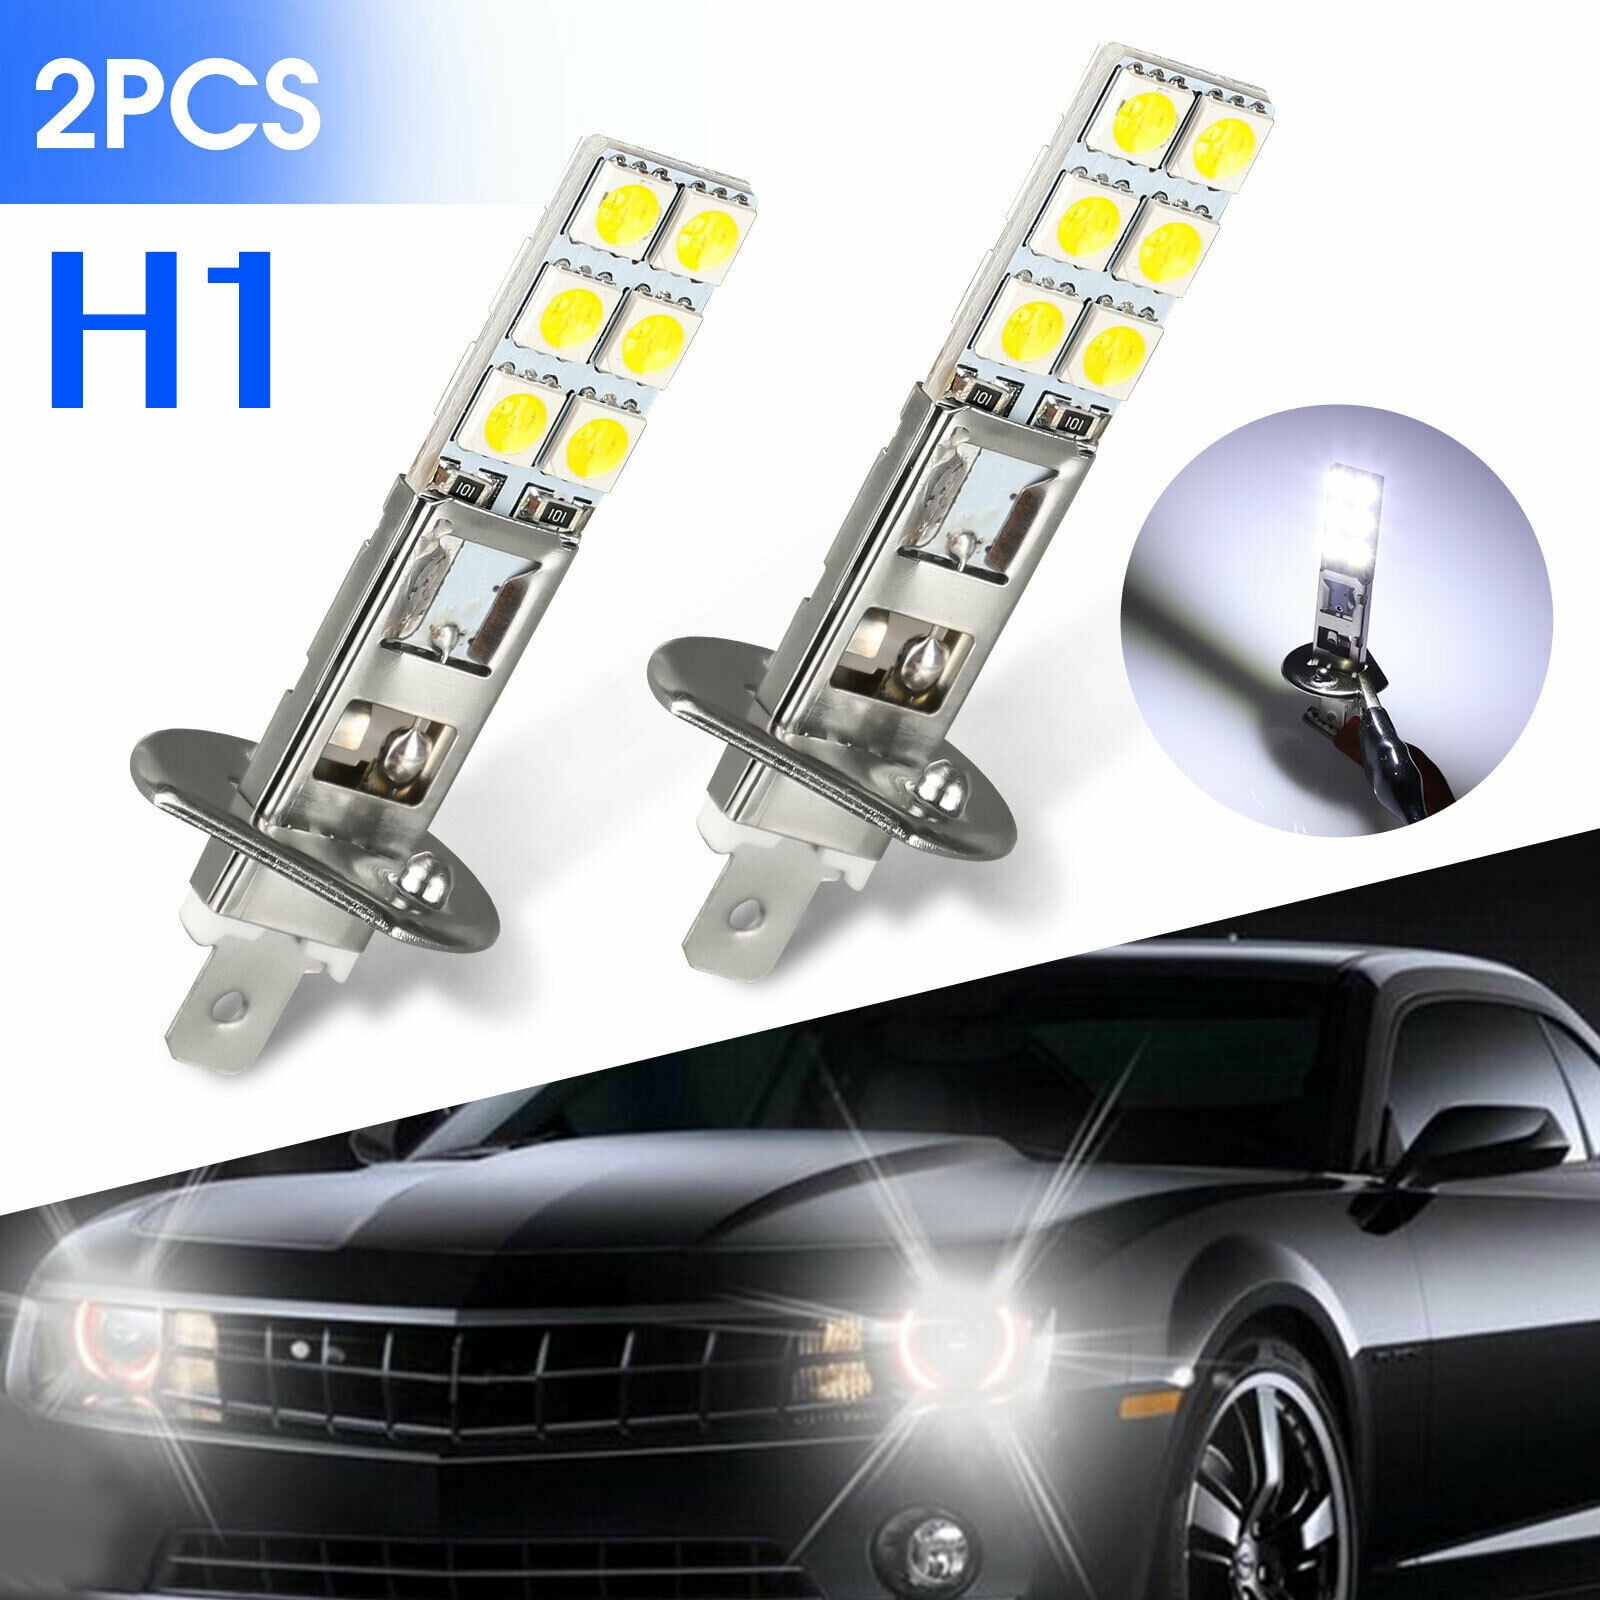 2X Car HID Xenon Headlight Lamp Light For H1 6K 6000K 55W Bulbs Replacement New